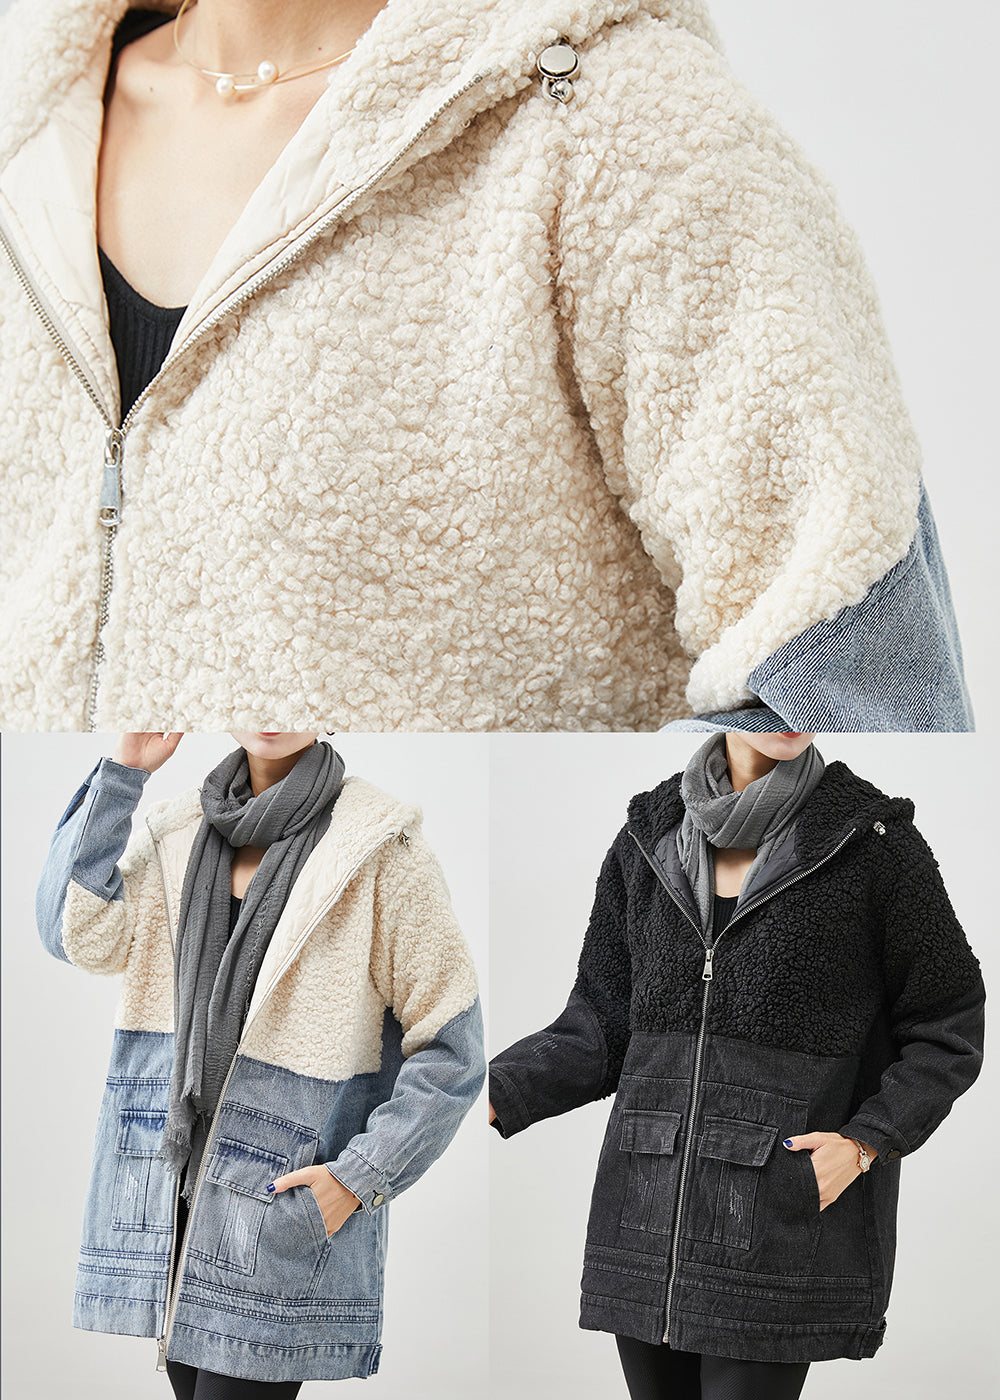 White Patchwork Woolen Fine Cotton Filled Puffers Jackets Hooded Winter